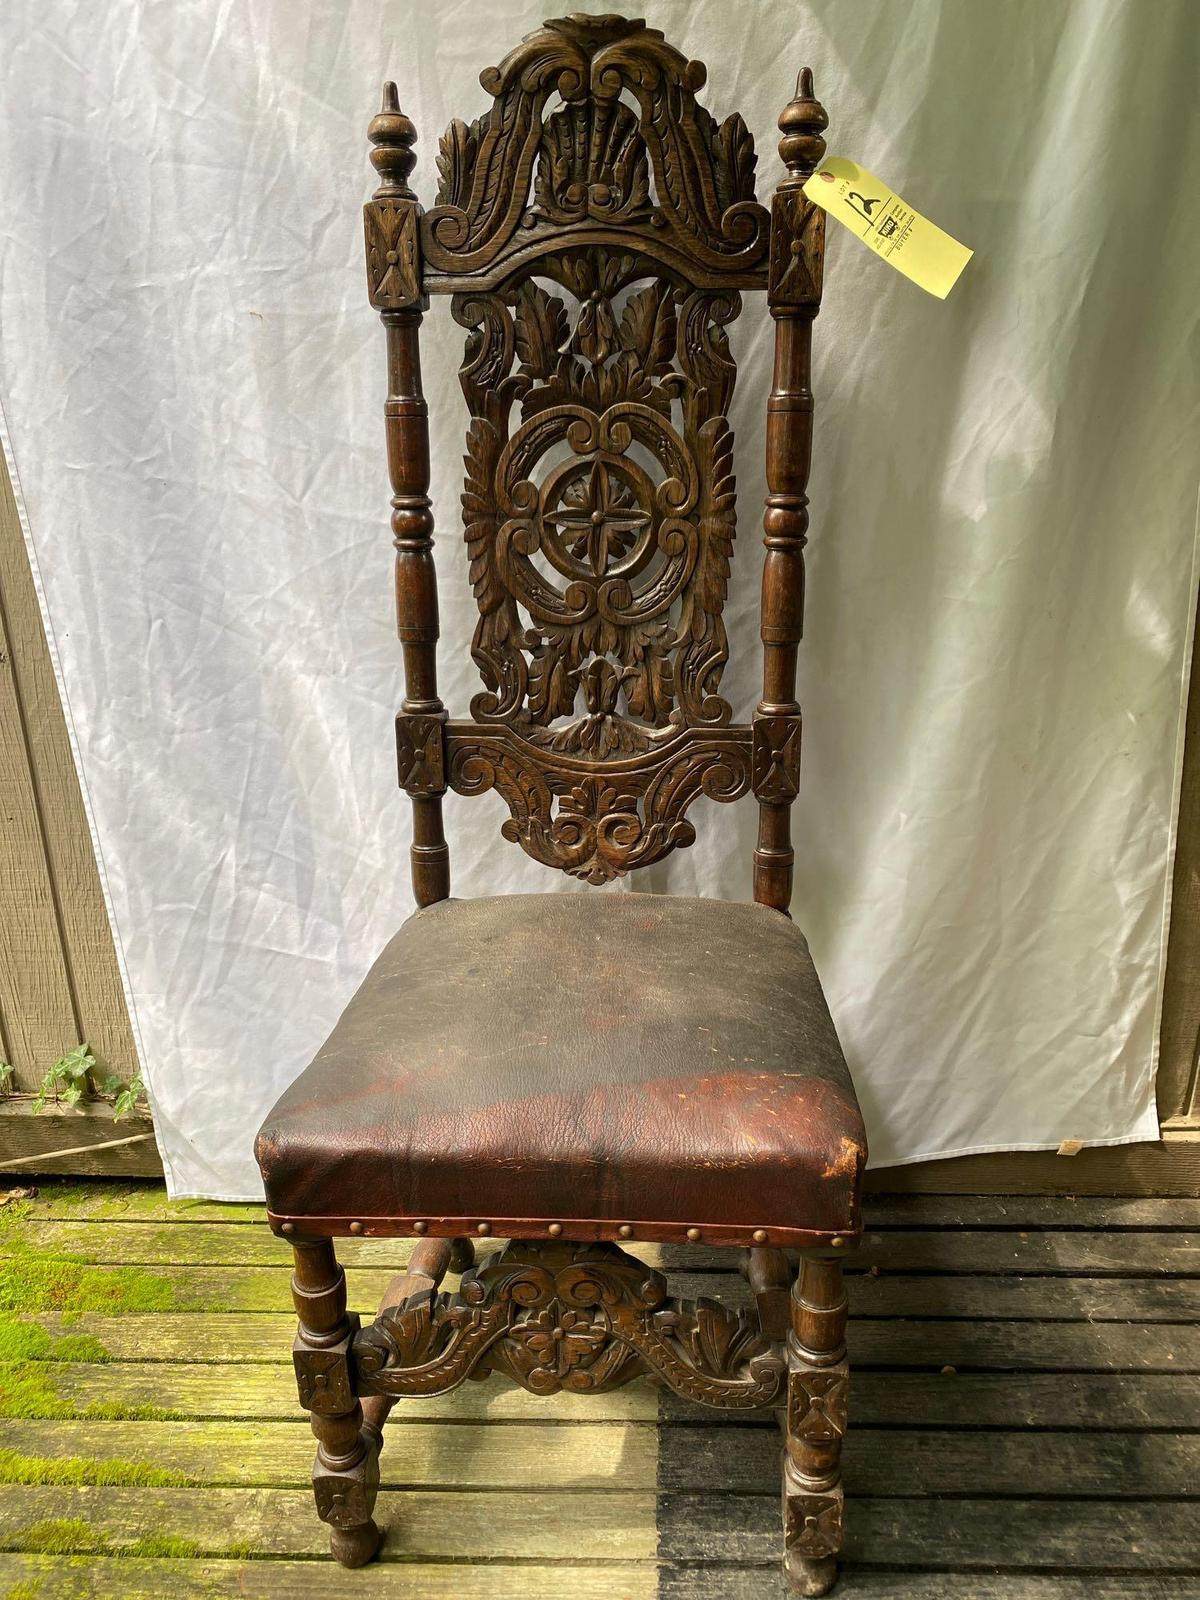 Early 1800's Jacobean style chair, 52" tall.